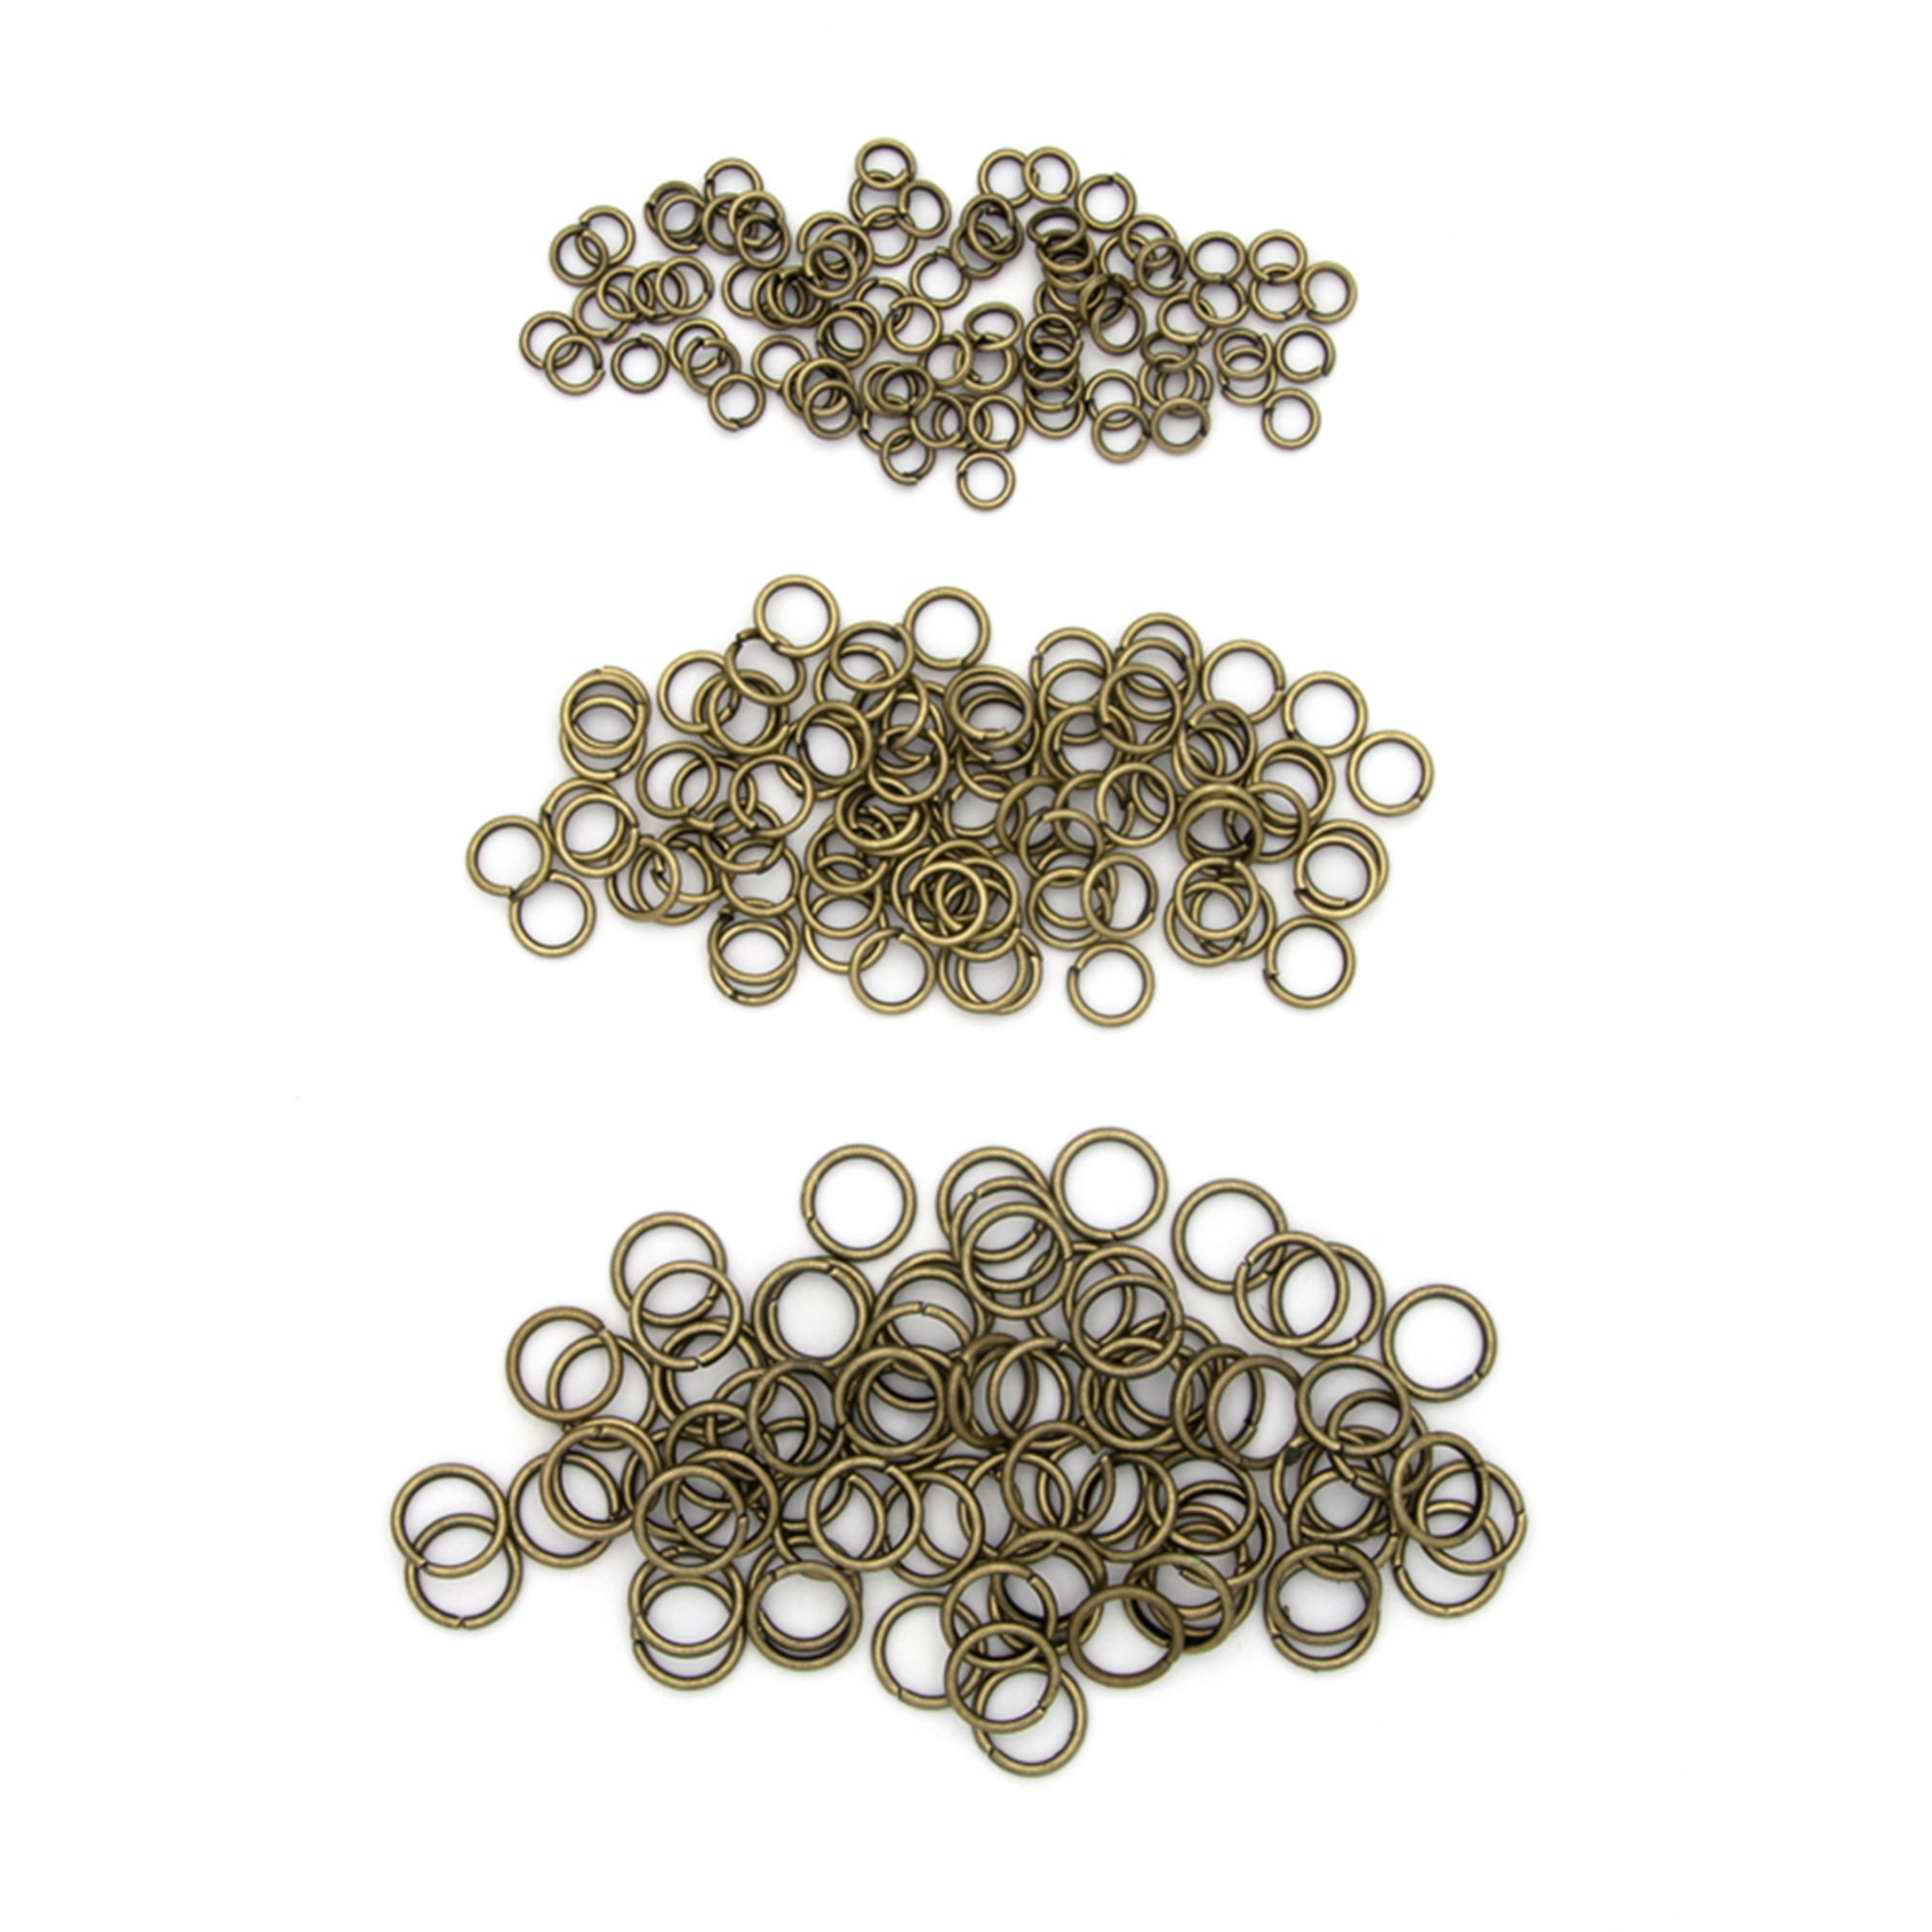 DADIFEN Gold Jump Rings 4mm 5mm 6mm 7mm 8mm 10mm Open Jump Rings Jewelry  Making Supplies Jump Ring for DIY Bracelet Earrings Necklace Jewelry  Findings